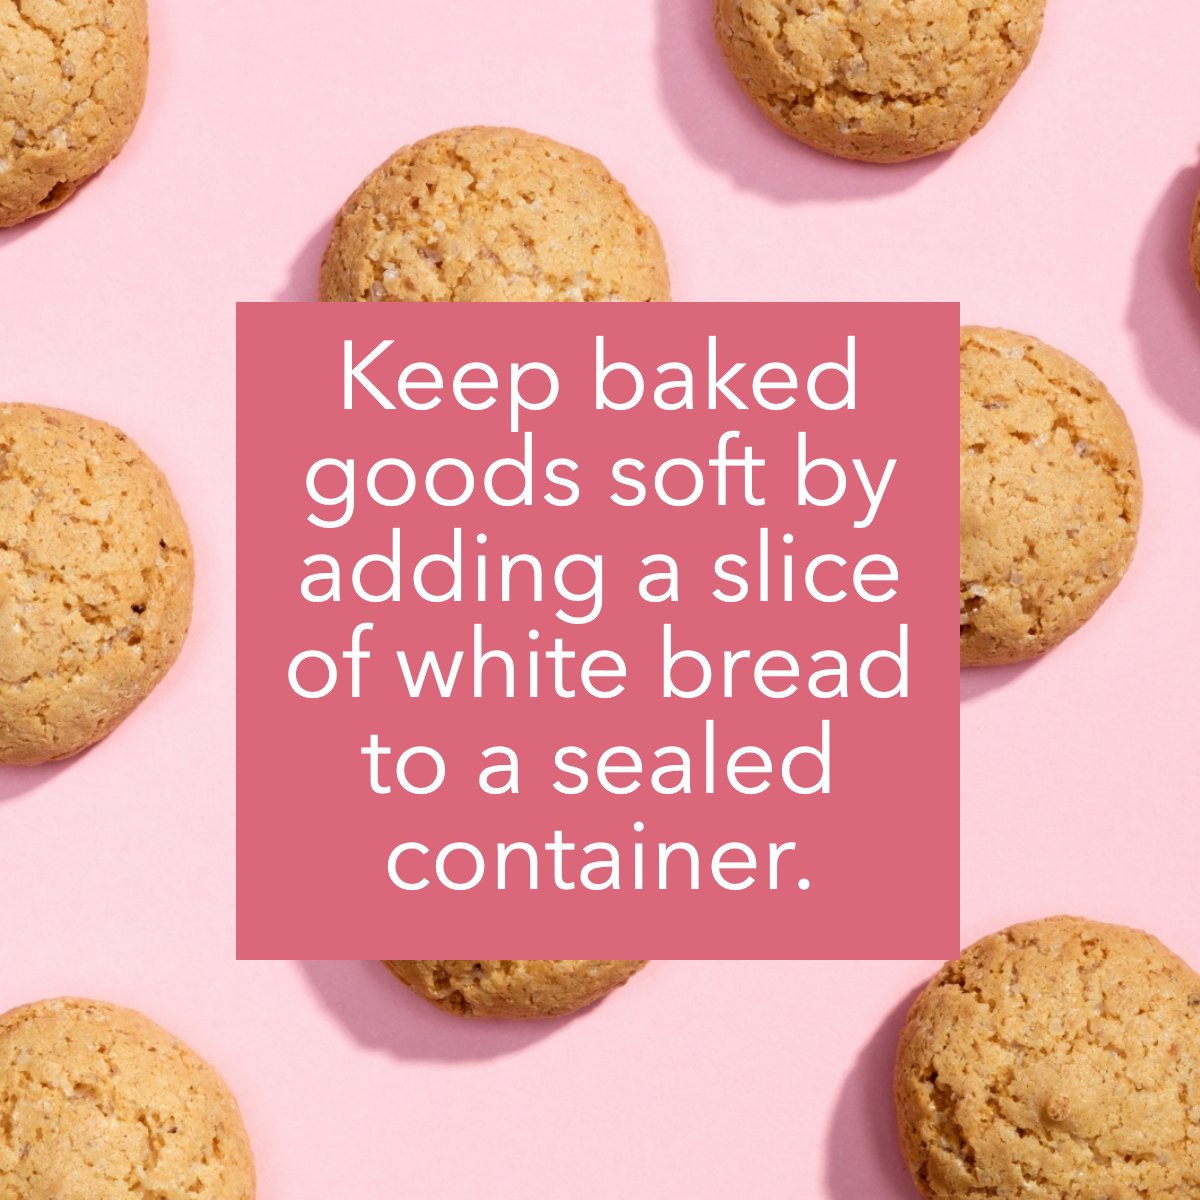 Ready for a #bakinghack?

Keep baked goods soft by adding a slice of white bread 🍞 to a sealed container.

What's the best kind of cookie 🍪? Let us know in the comments!

#cookies #pink #baking #kitchenhack #funfact #bakingtips
 #sellmyhome #buymyhome